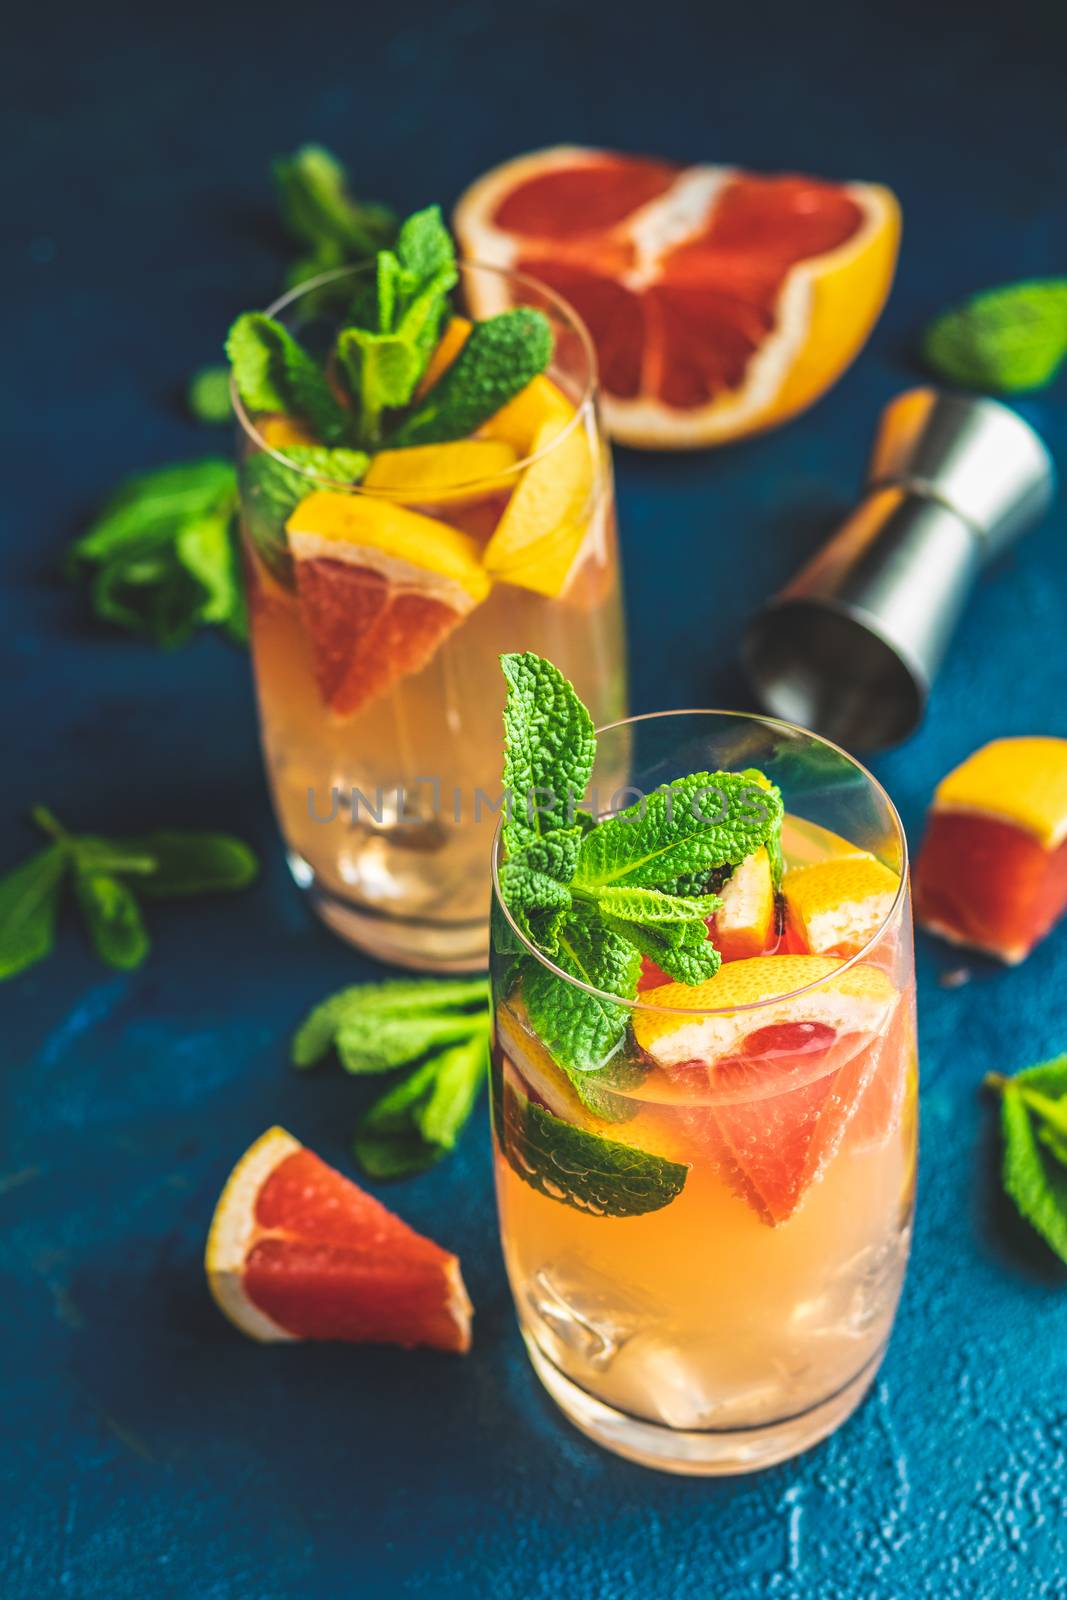 Grapefruit and mint gin tonic cocktail, refreshing drink with ice. Cold summer citrus refreshing drink cocktail or beverage with ice on dark blue concrete surface close up.